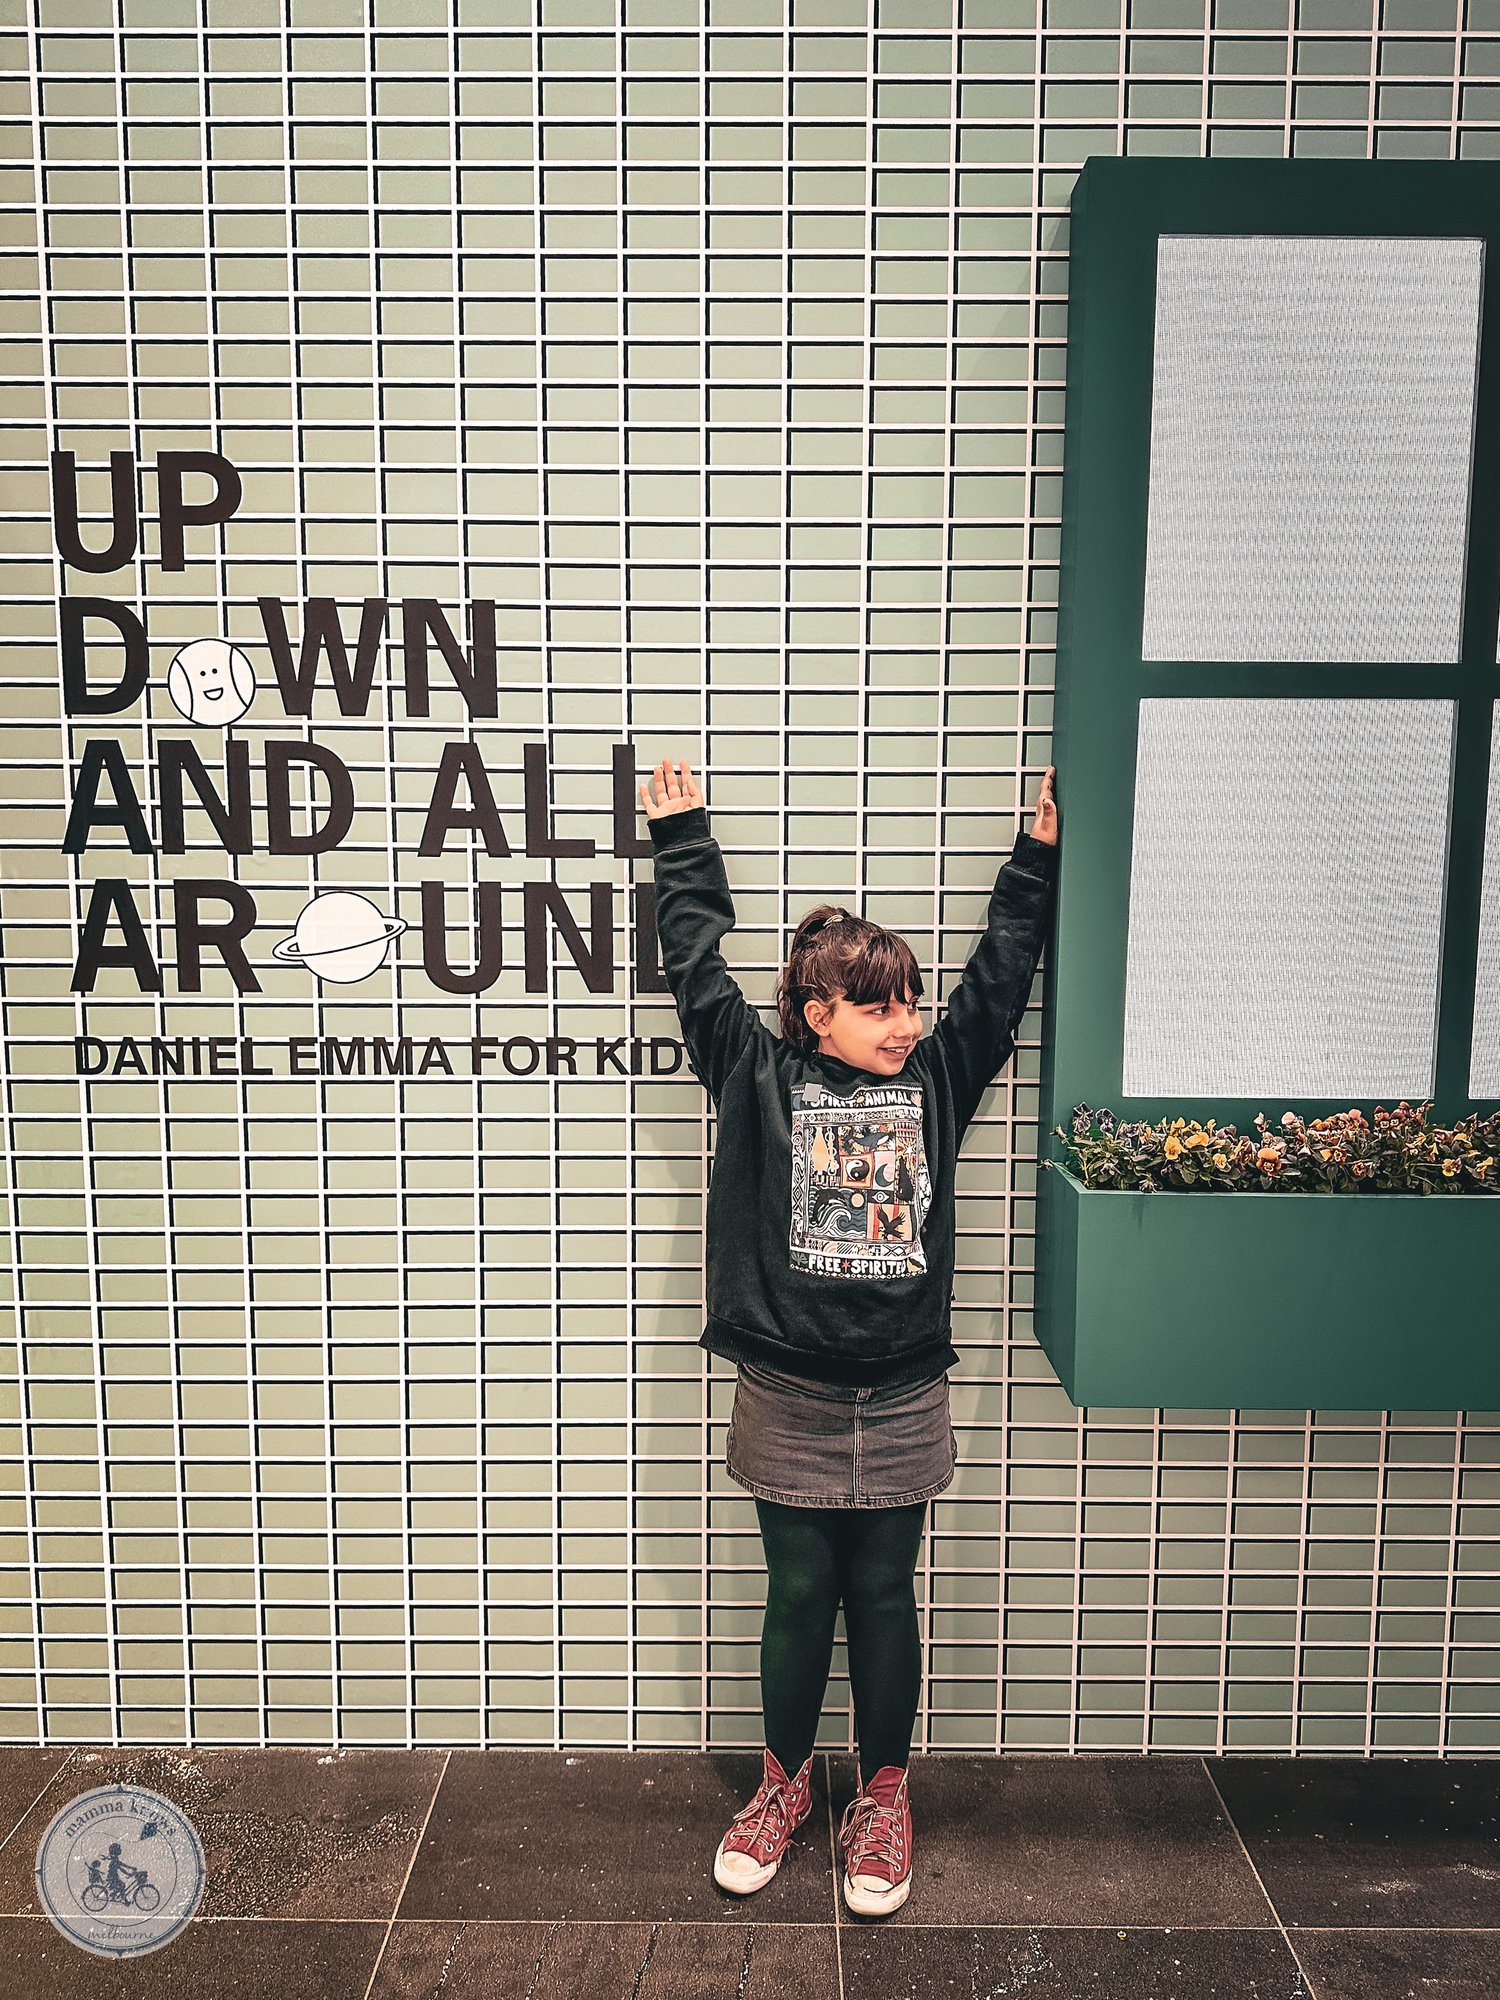 Up, Down and All Around: Daniel Emma for Kids @ NGV